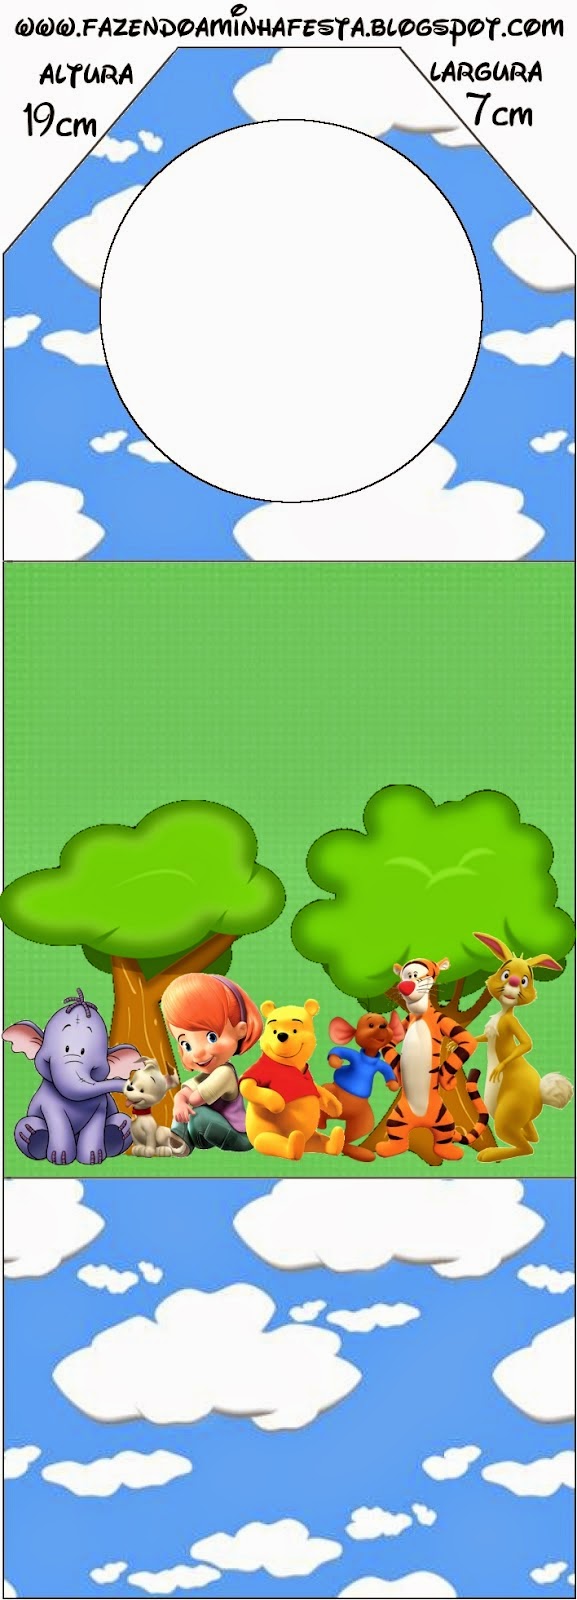 Free Printable Book Marks of Winnie the Pooh.